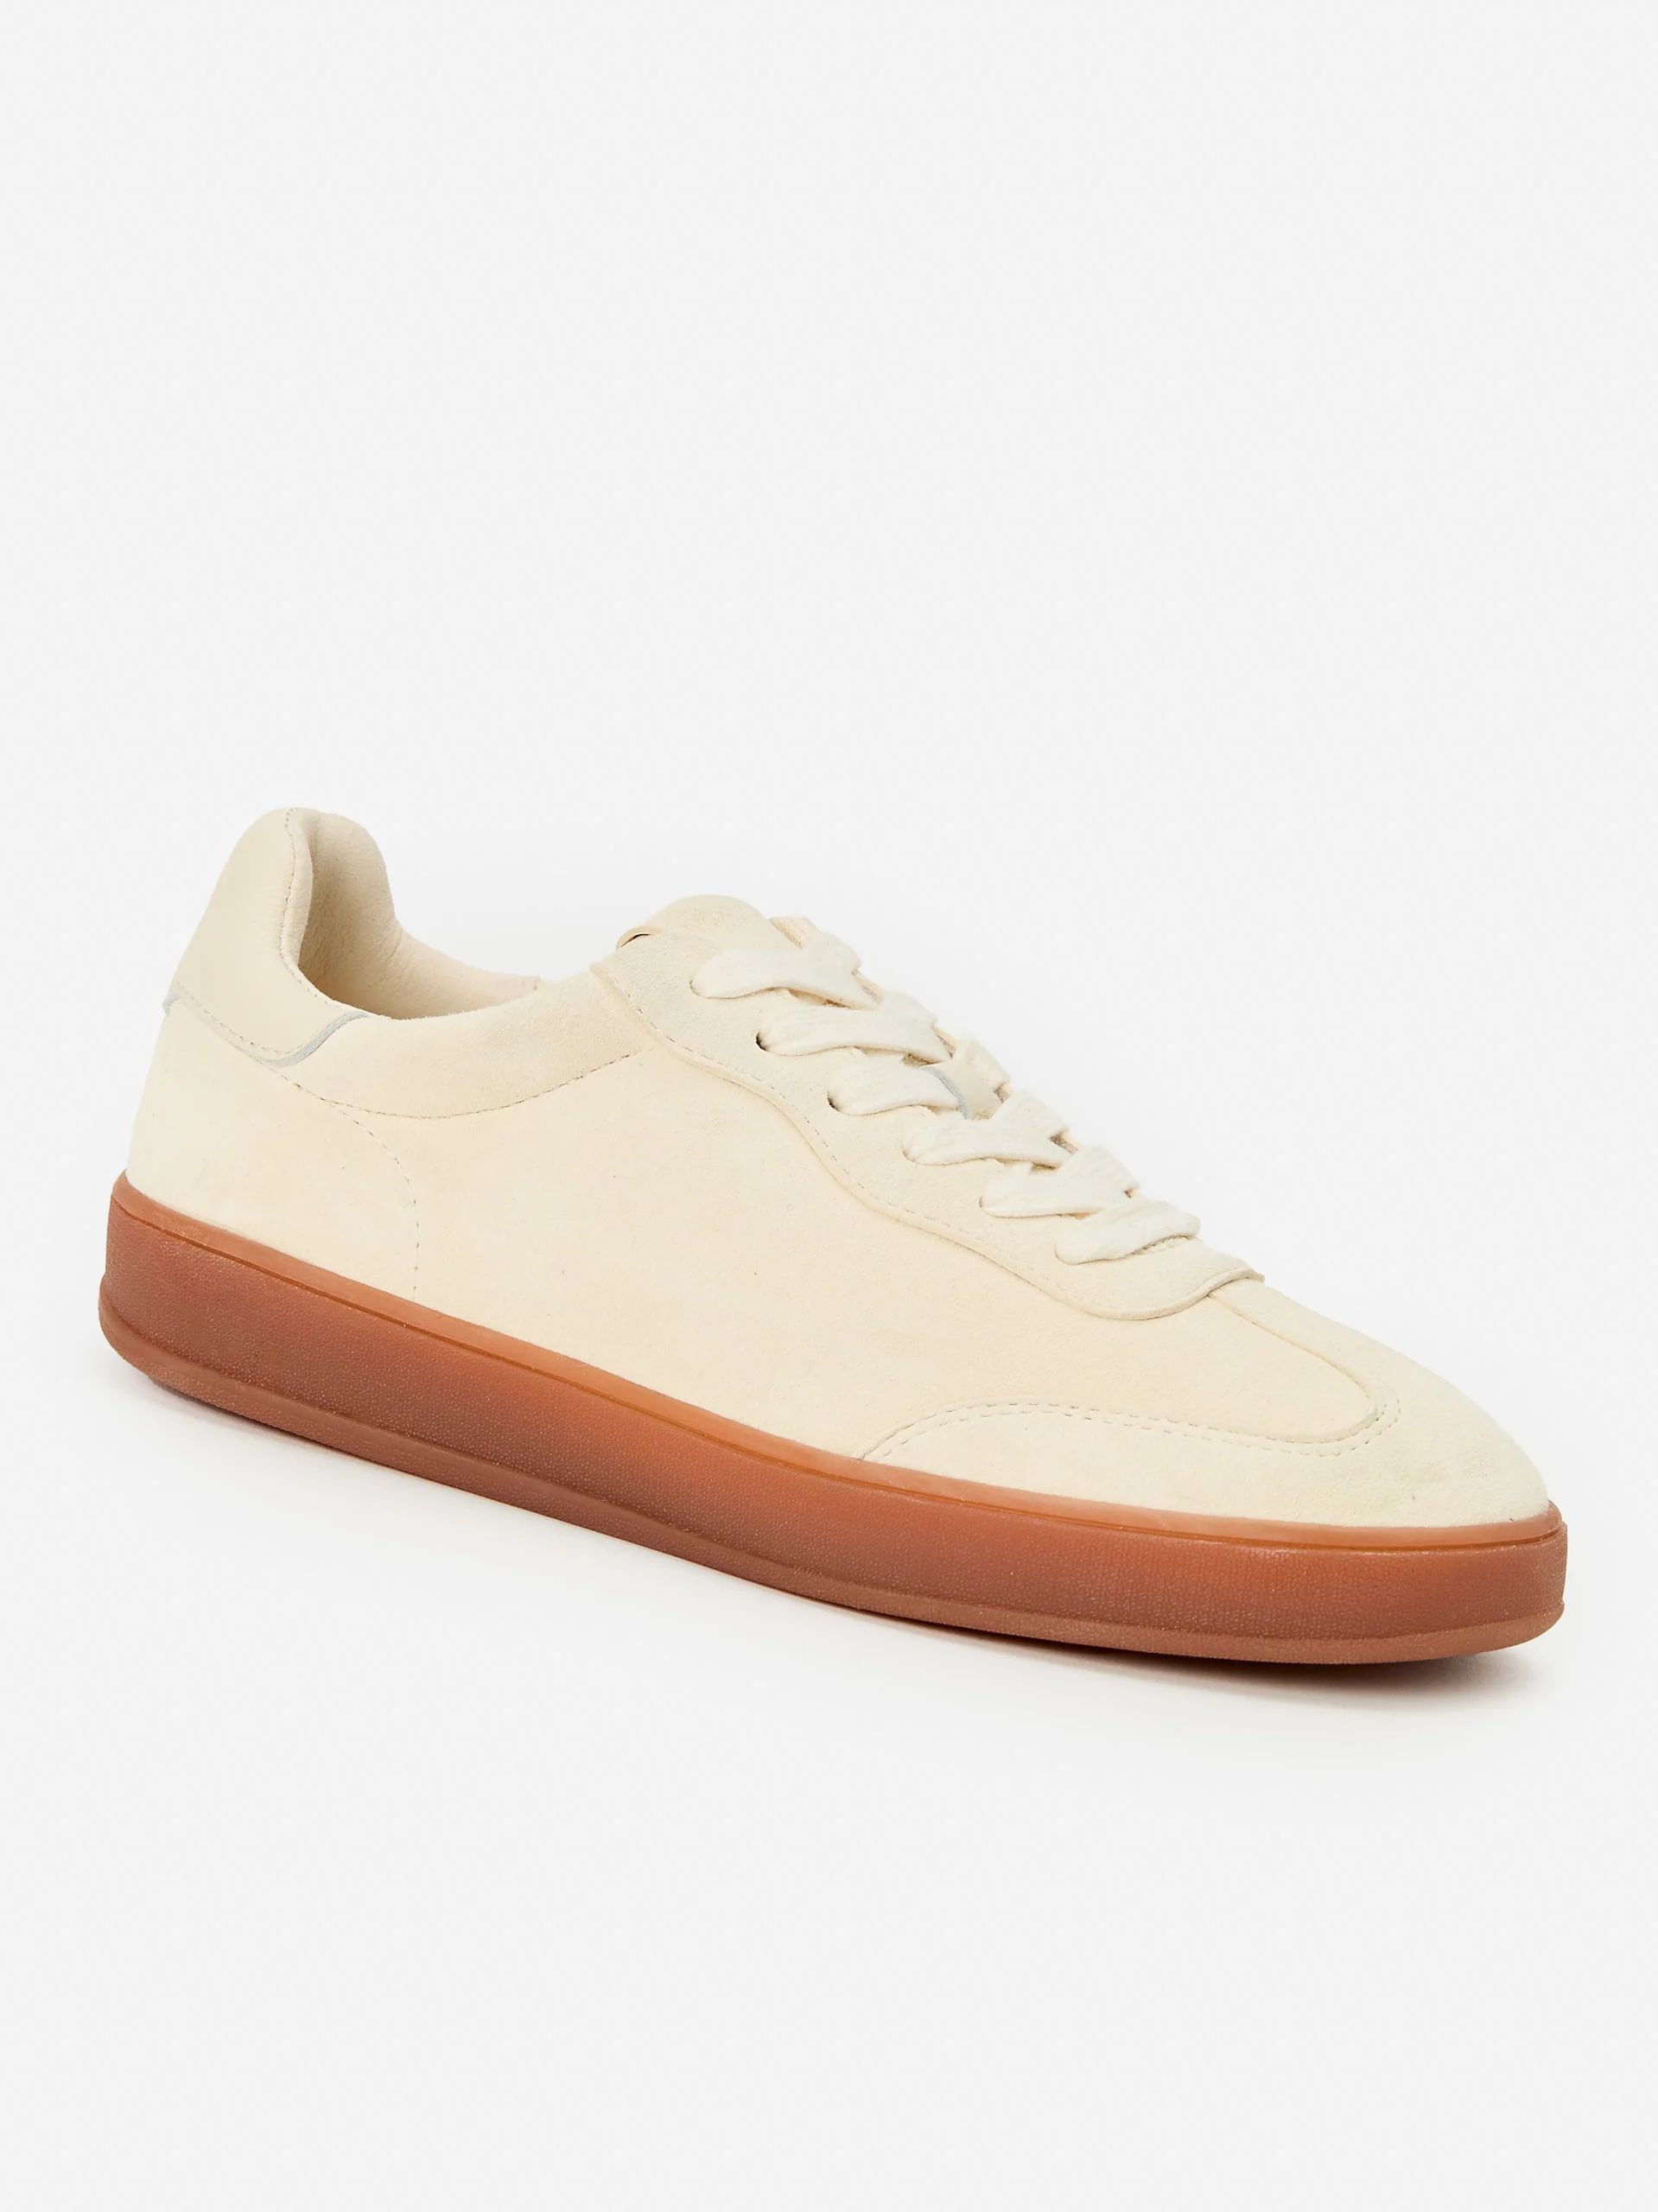 Off White Solid Zibby Suede Sneakers | Women's Shoes  | J.McLaughlin | J.McLaughlin